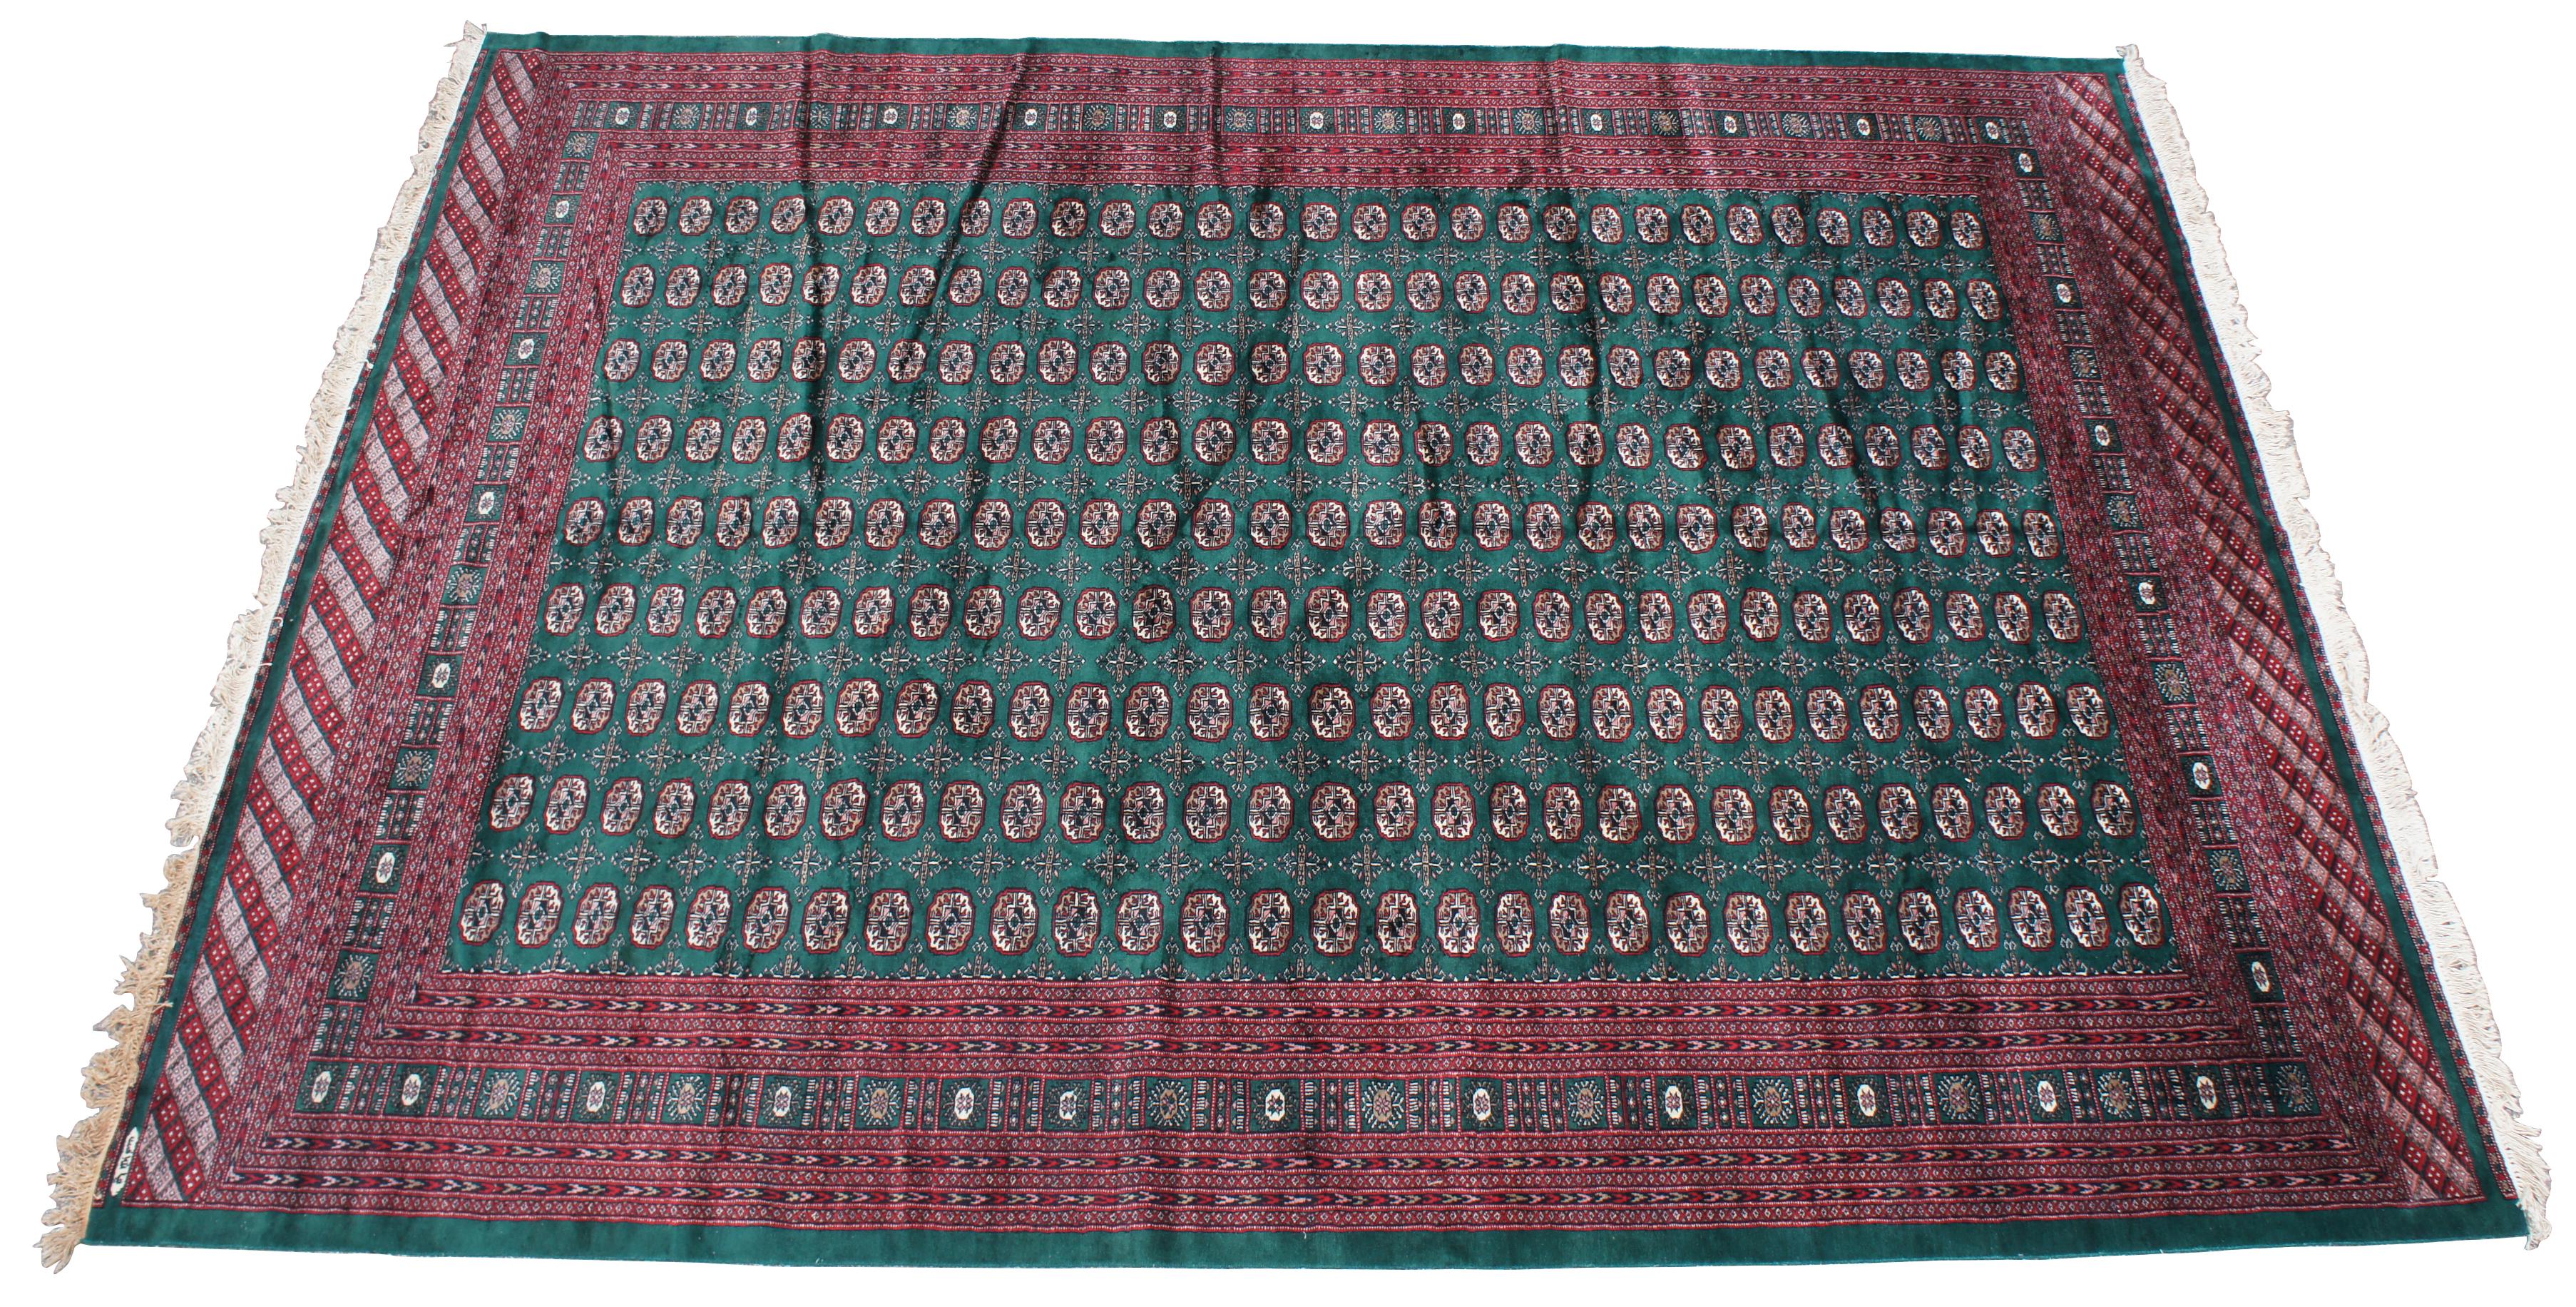 Exquisite Pakistani royal Bokhara signed wool area rug. Emerald green with reds and whites. Intricately detailed with a layered switchback pattern.